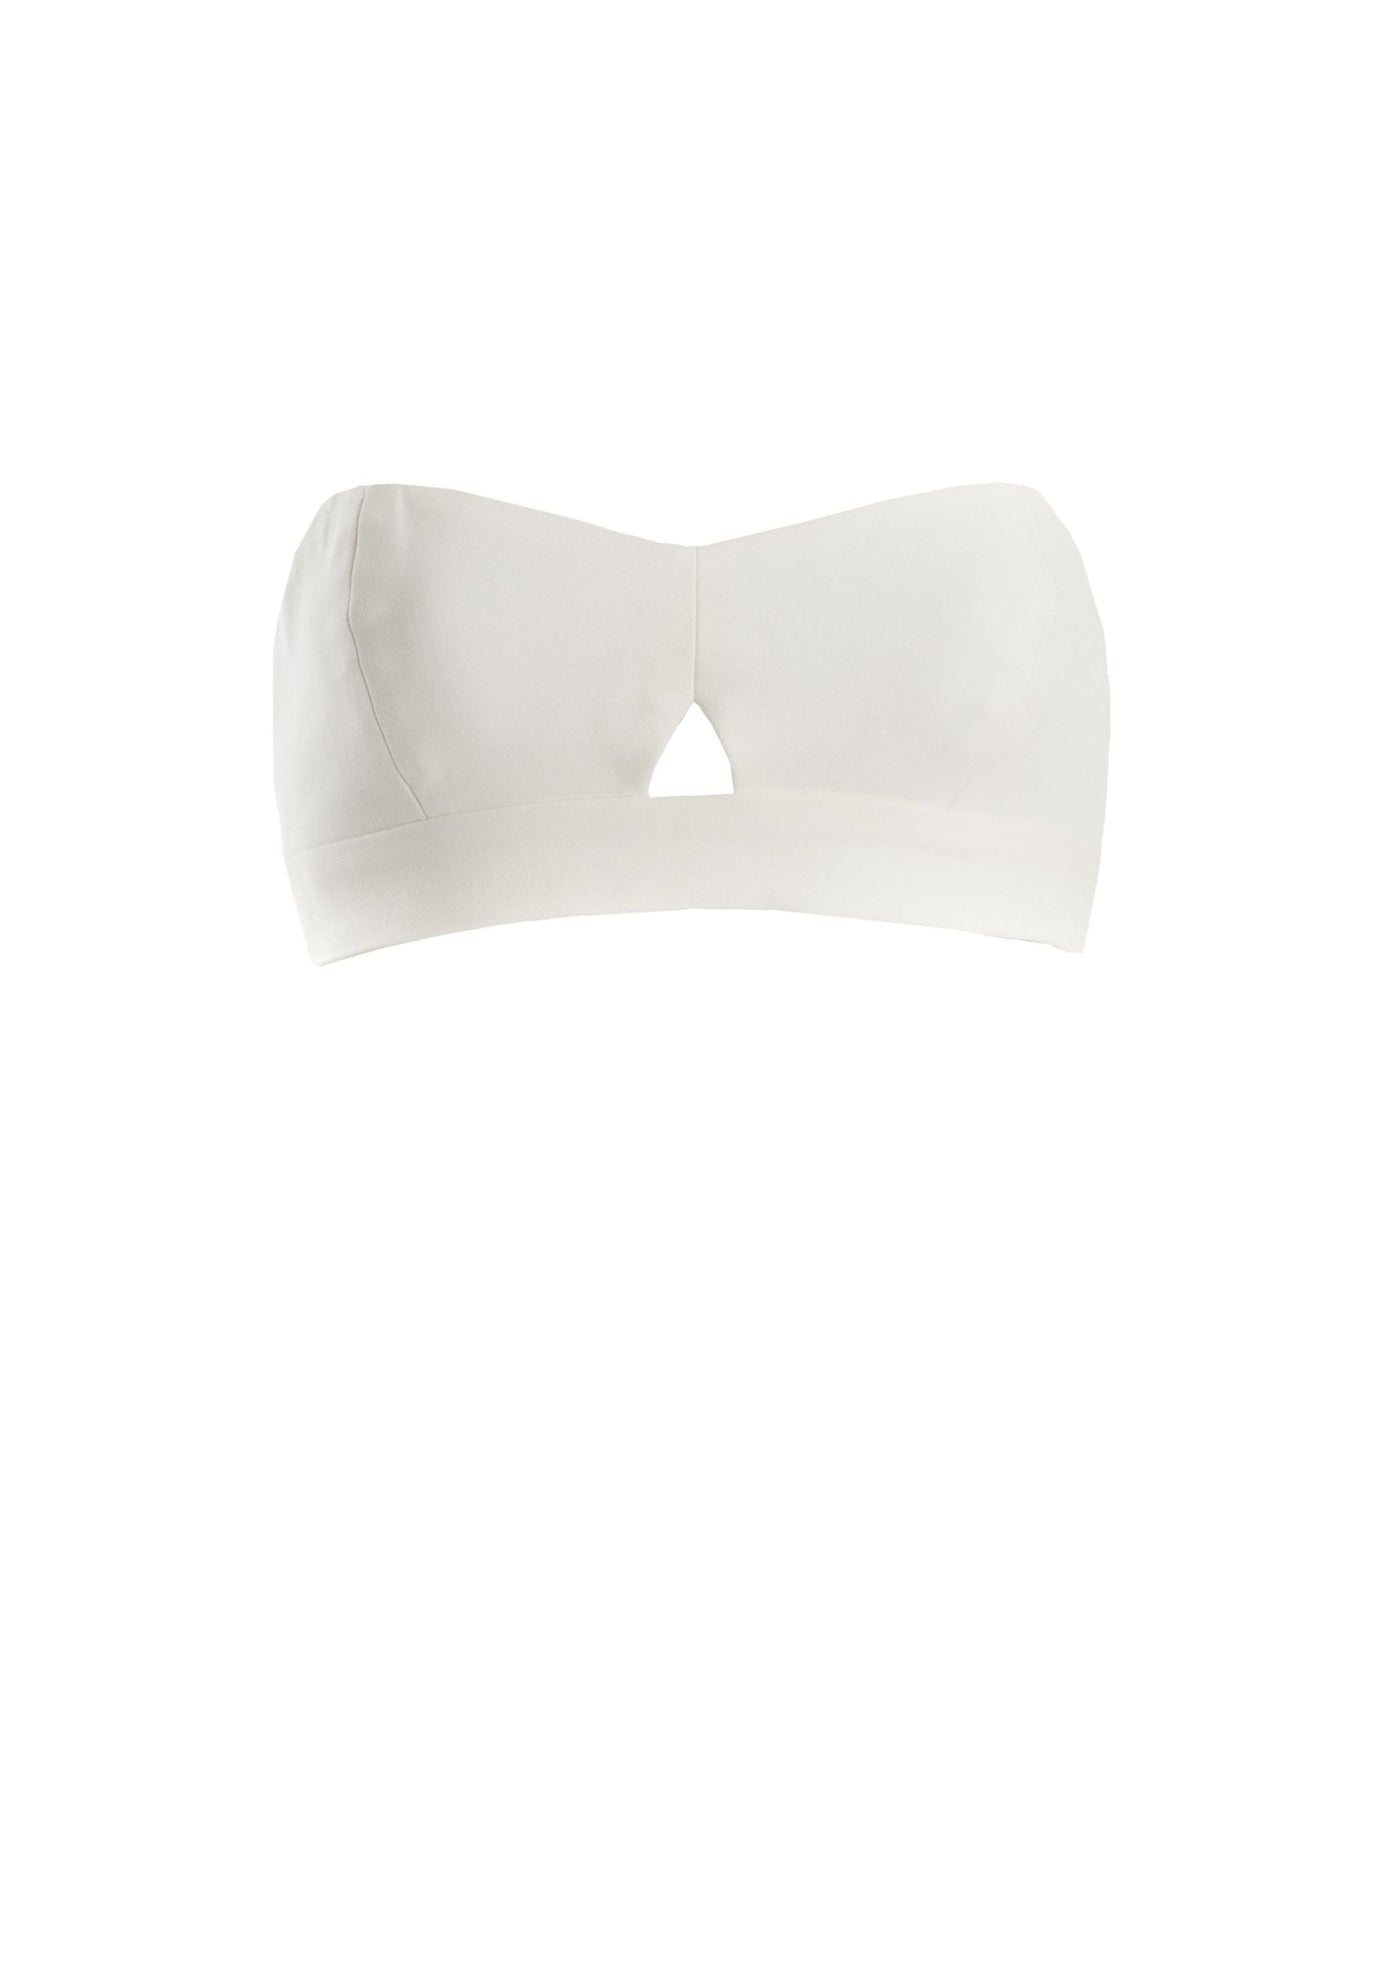 Pearl Bandeau Top - The Clothing LoungeNOPIN